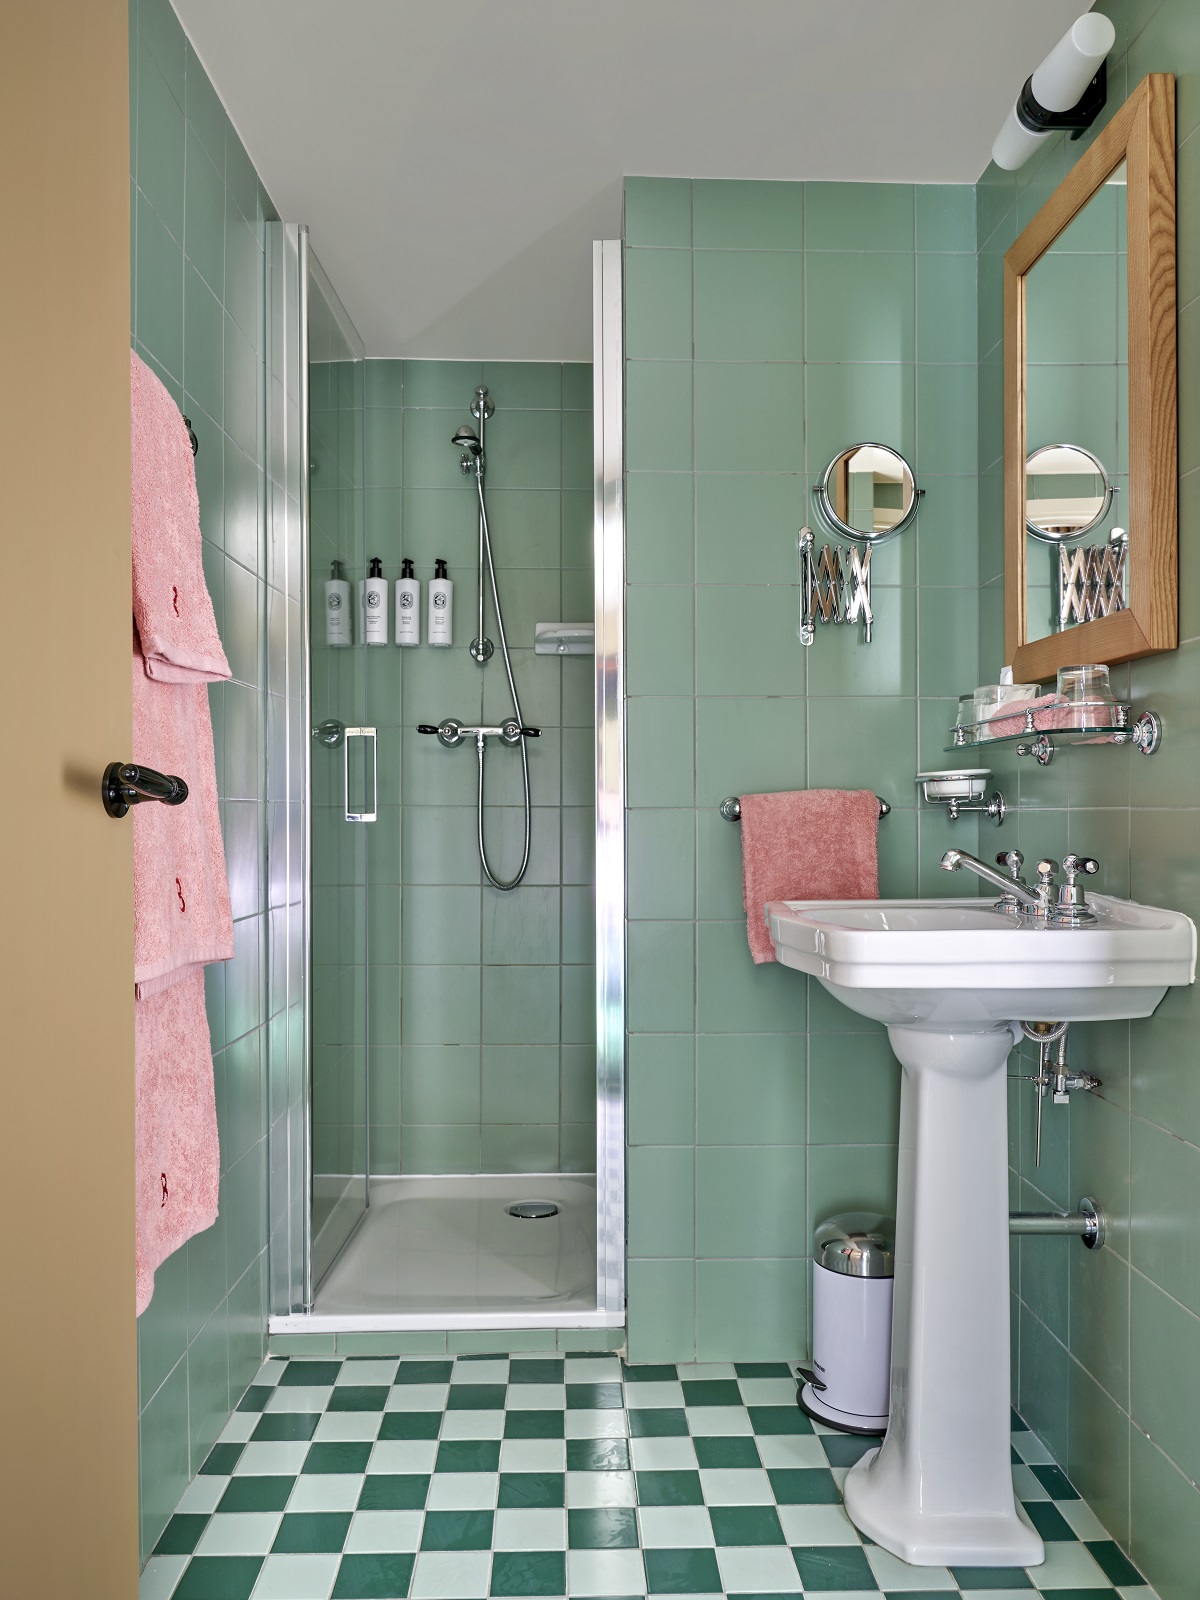 ensuite shower with white vintage style basin and green and white checked tiled floor